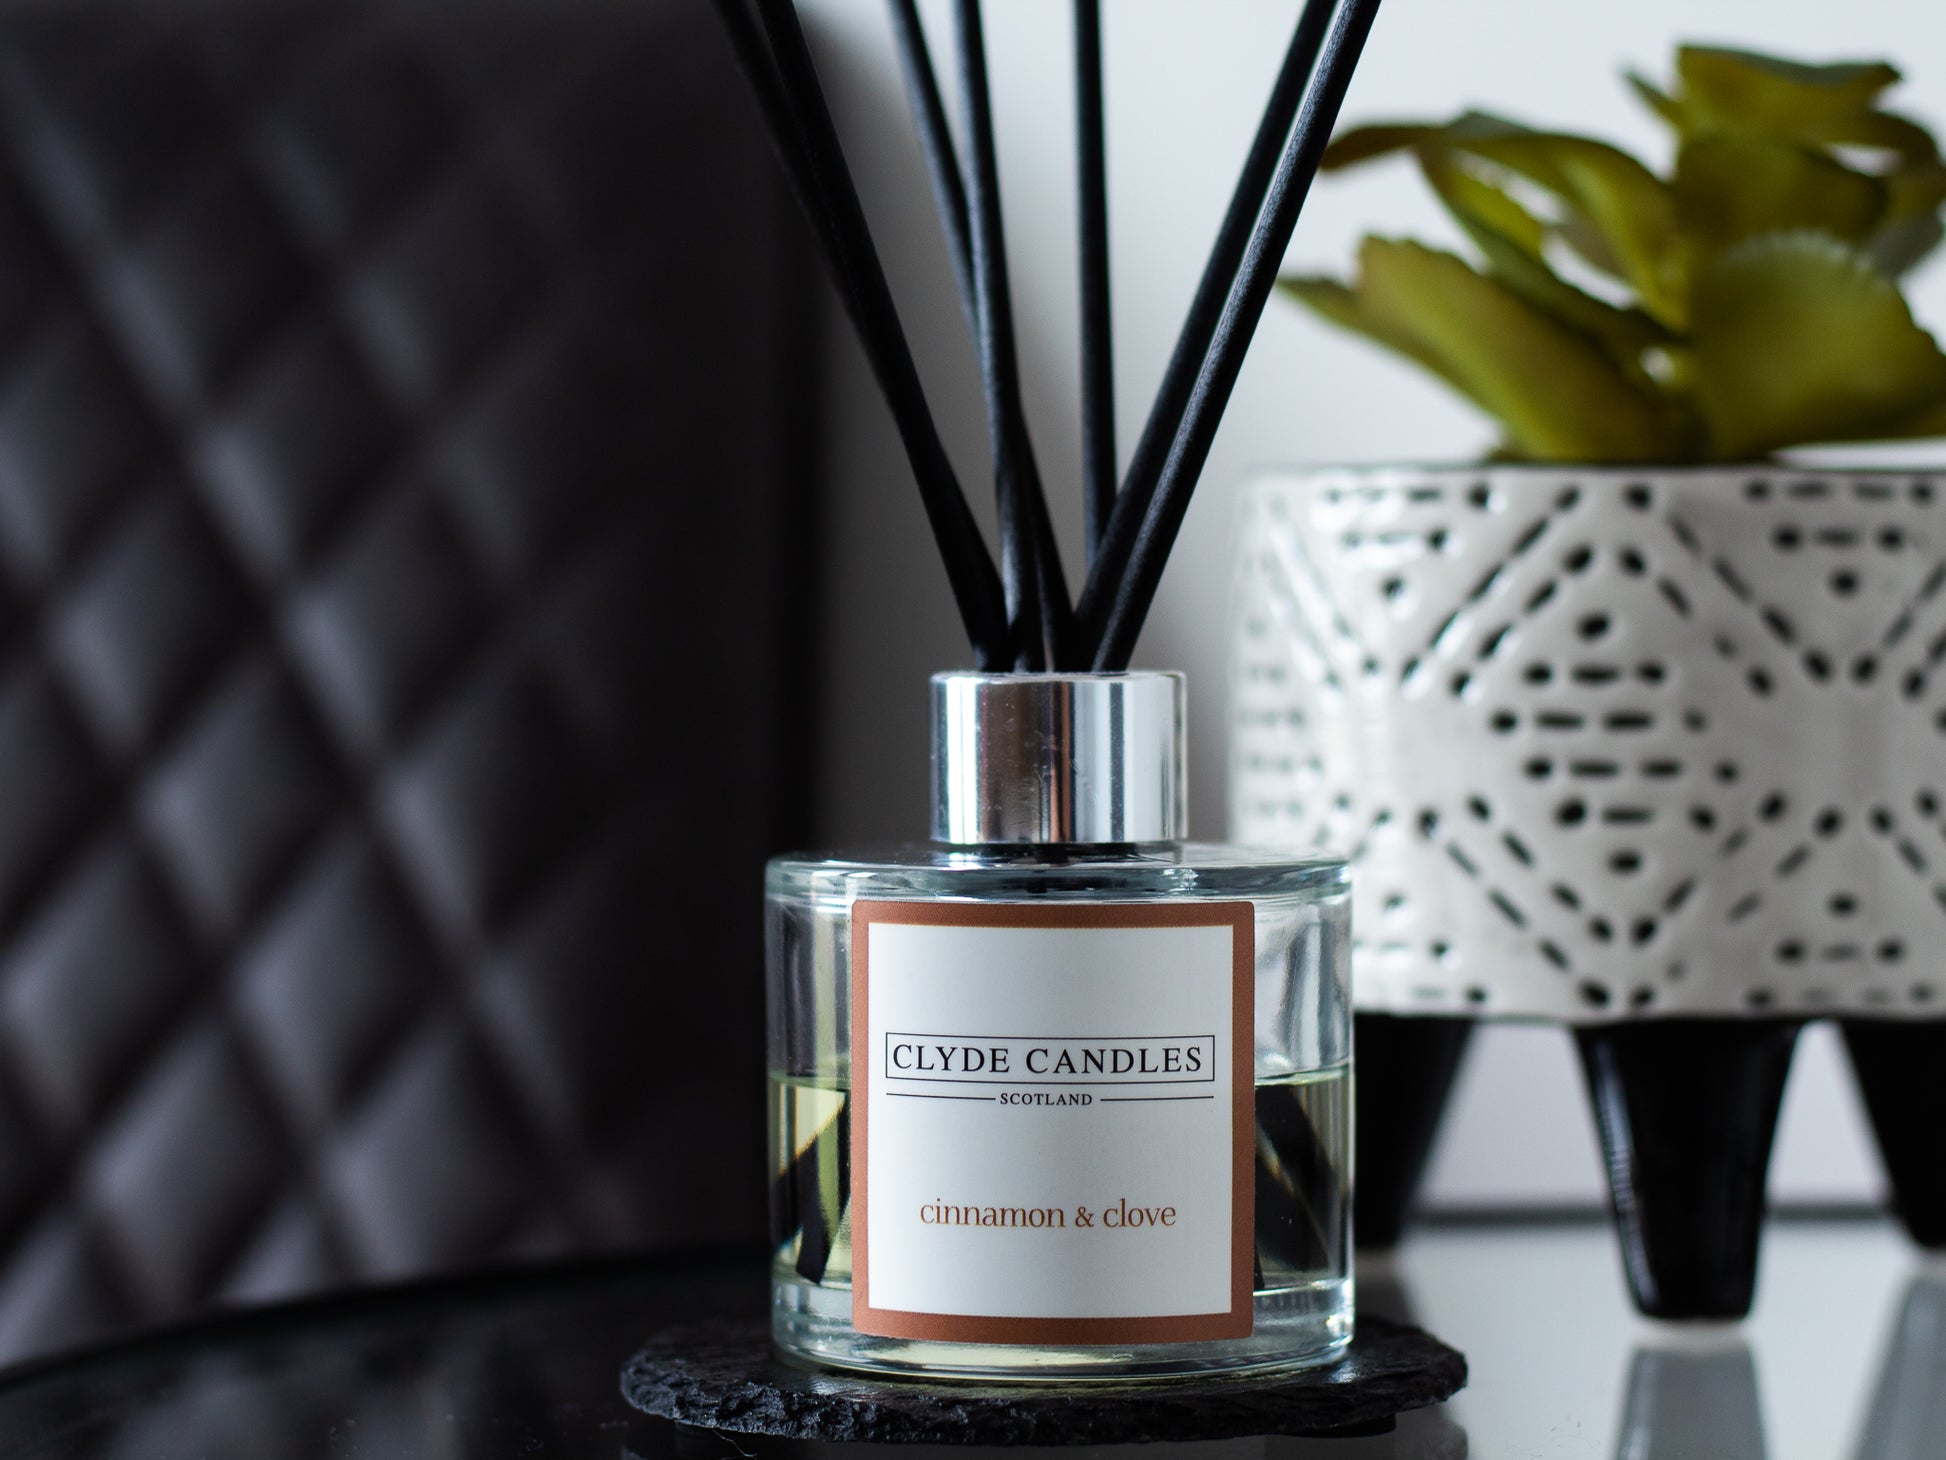 Cinnamon & Clove Reed Diffuser - Clyde Candles, Luxury Diffuser Oil with a Set of 7 Fibre Sticks, 100ml, Best Aroma Scent for Home, Kitchen, Living Room, Bathroom. Fragrance Diffusers set with sticks